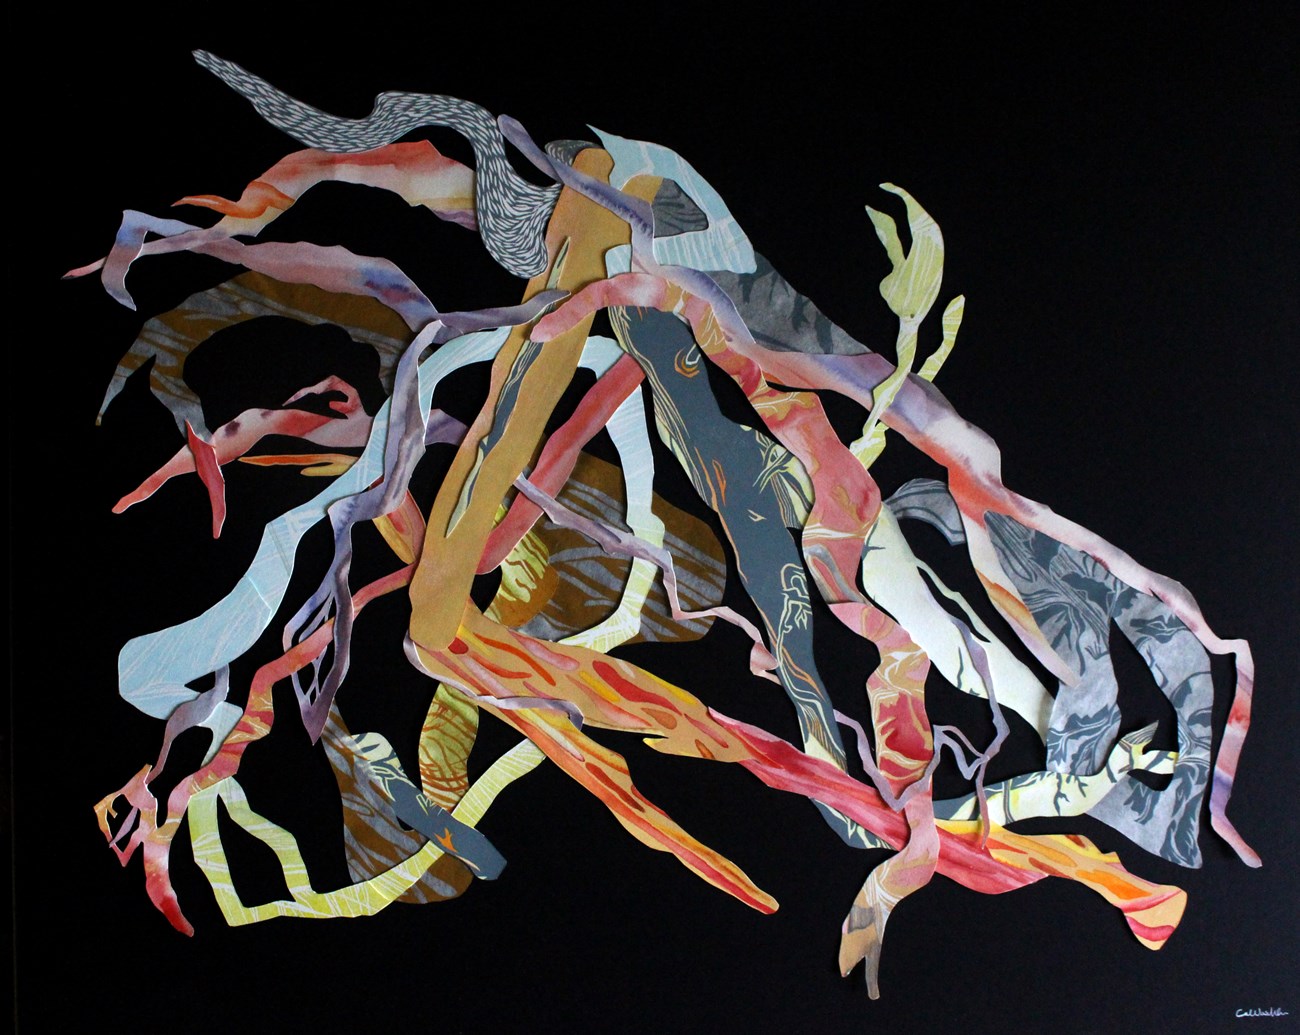 Layers of paper with different patterns and colors, each piece cut into twisted and branching shapes that layer over and intertwine with one another.